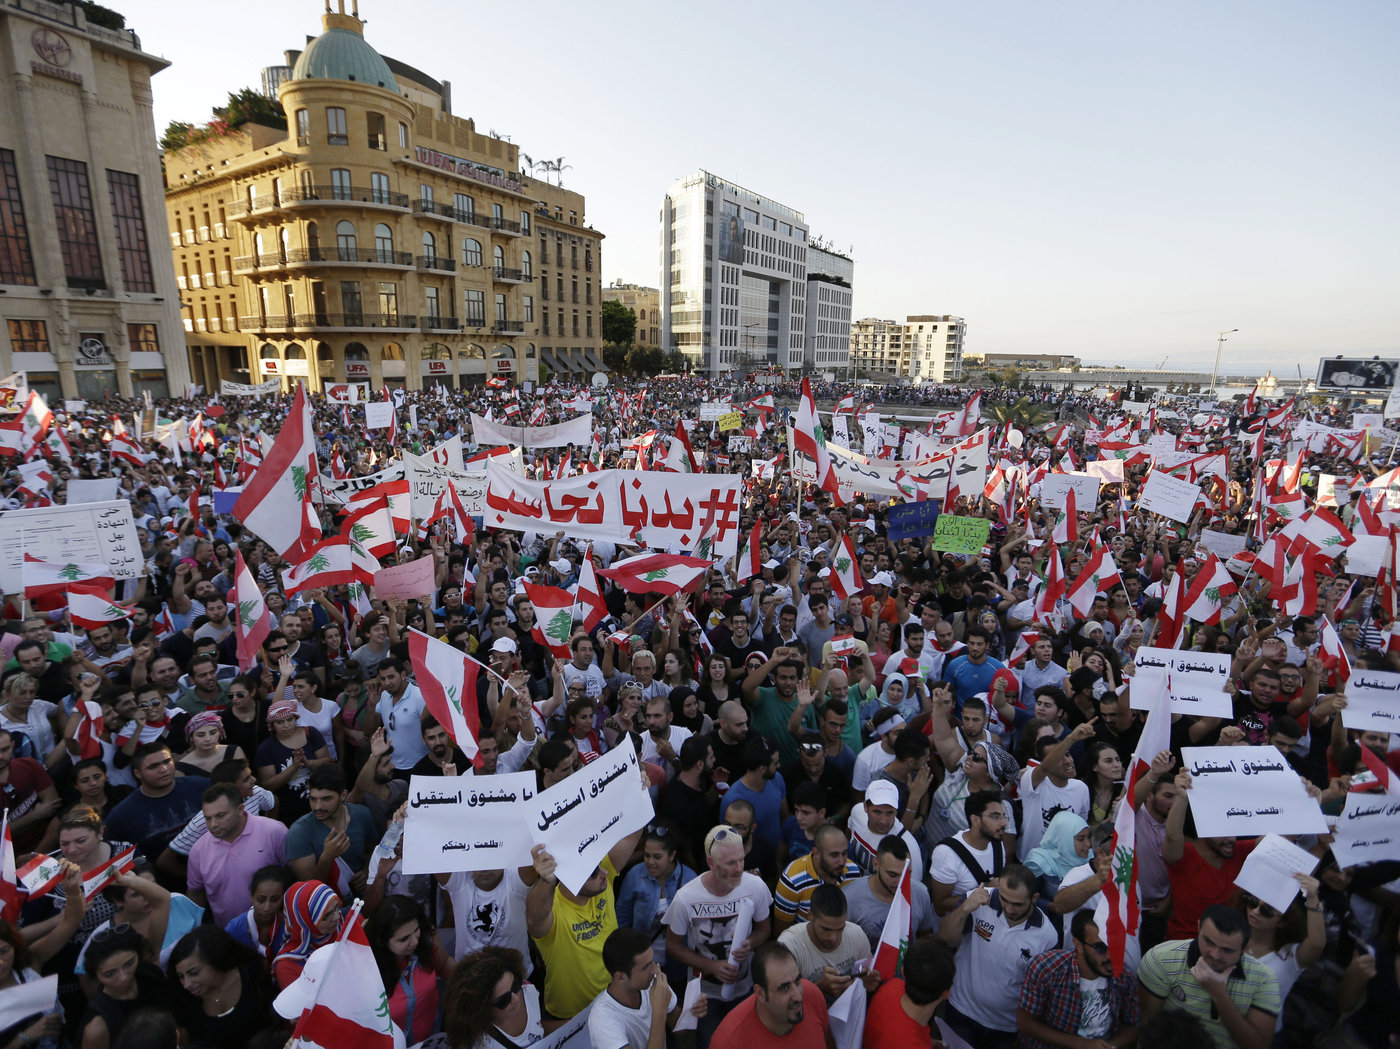 Demonstrators in downtown Beirut, Lebanon, protest the ongoing trash crisis and government corruption, August 29, 2015. PHOTO: Hassan Ammar, AP.